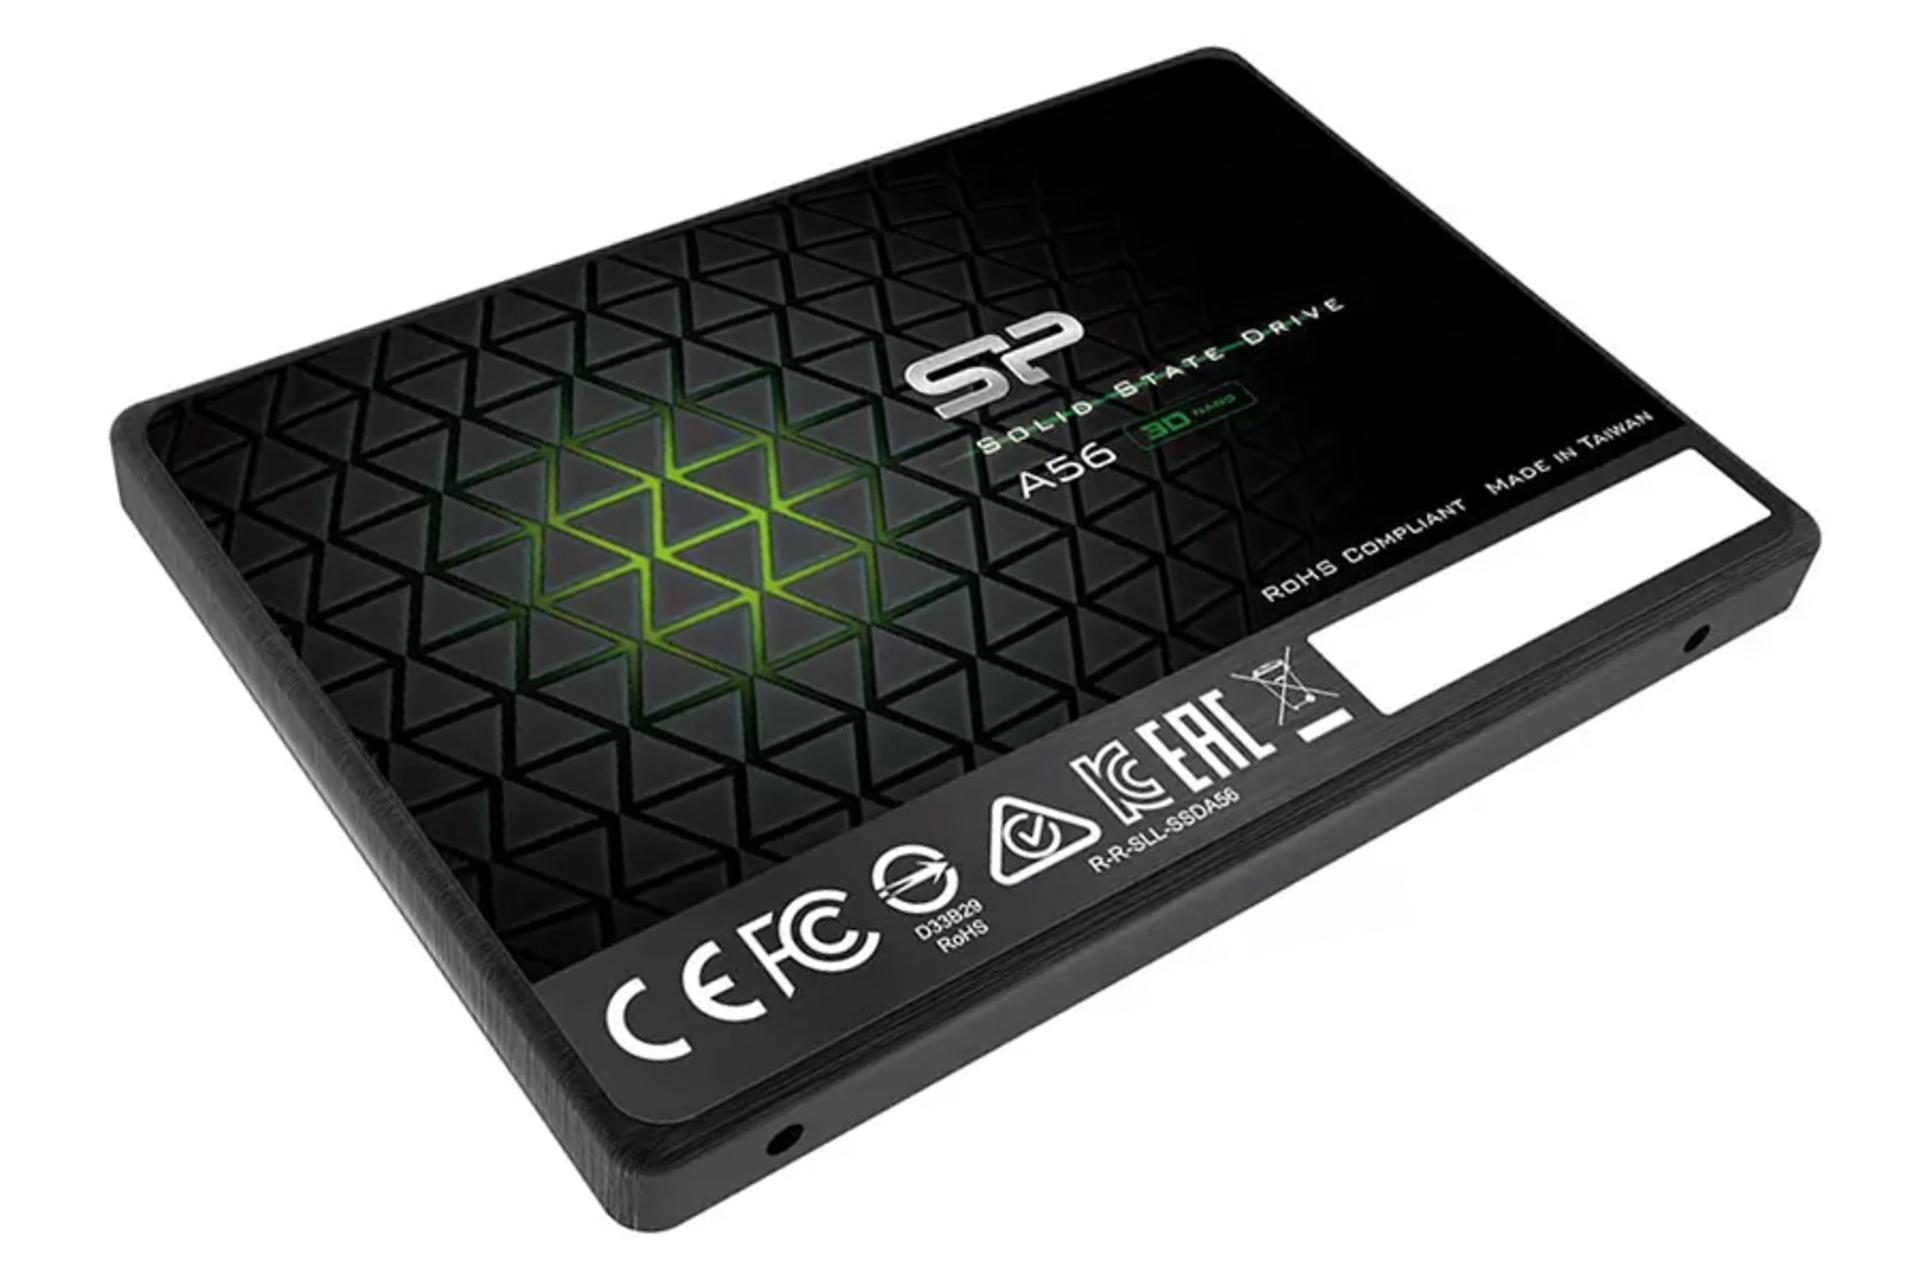 SSD سیلیکون پاور Ace A56 SATA 2.5 Inch ظرفیت 256 گیگابایت